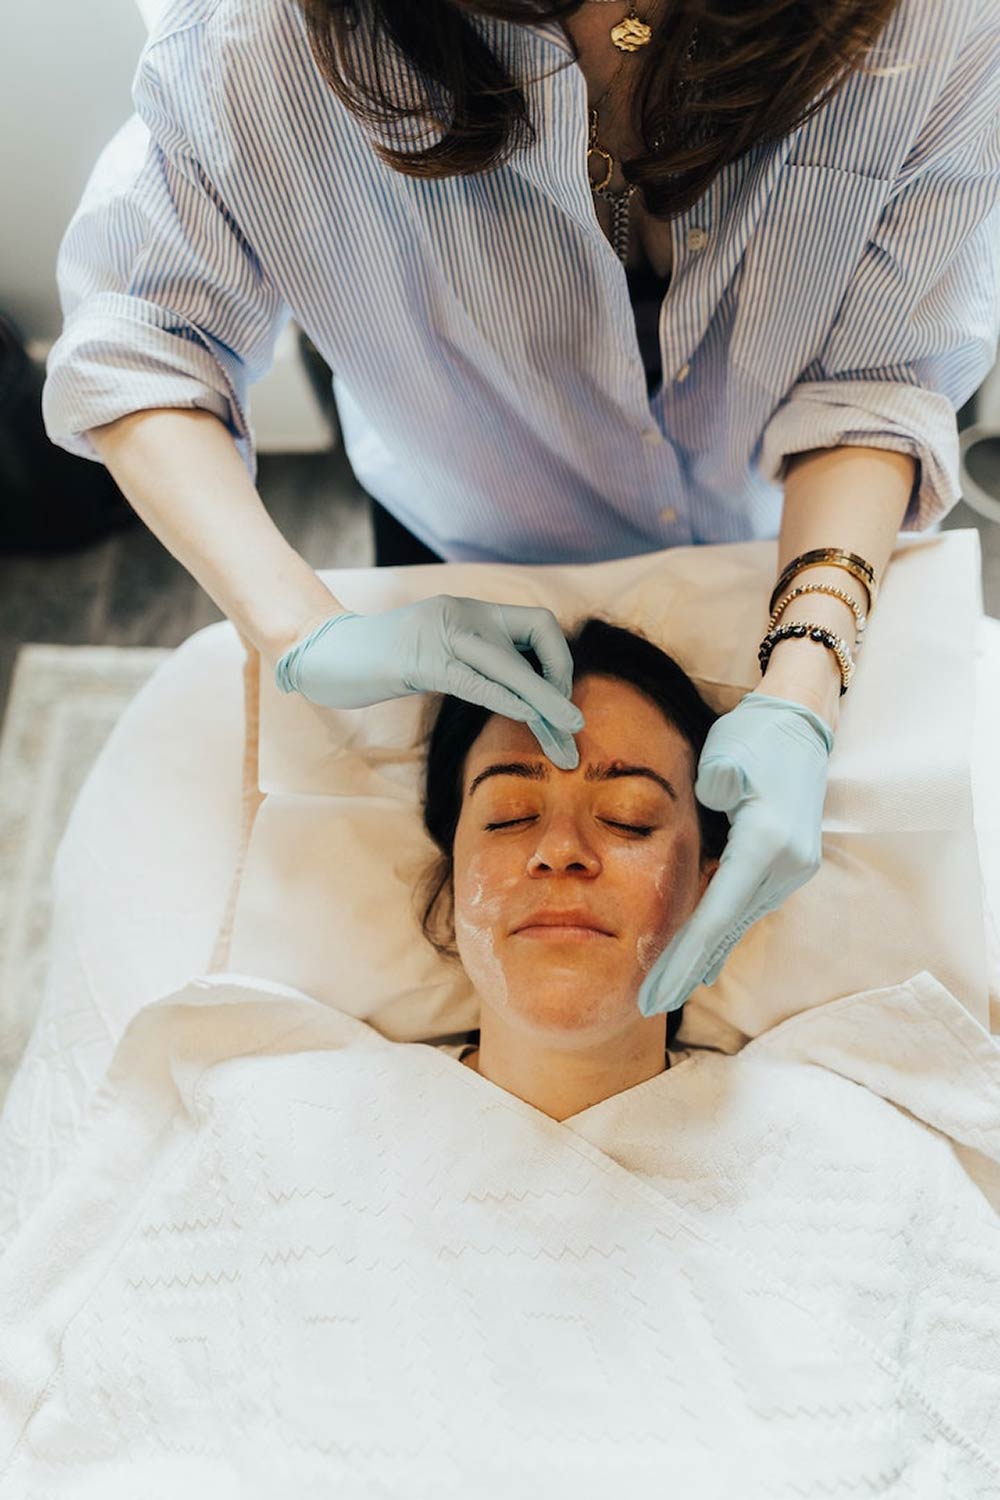 Renee Lapino Clinic's Midsummer Cleanup Facial